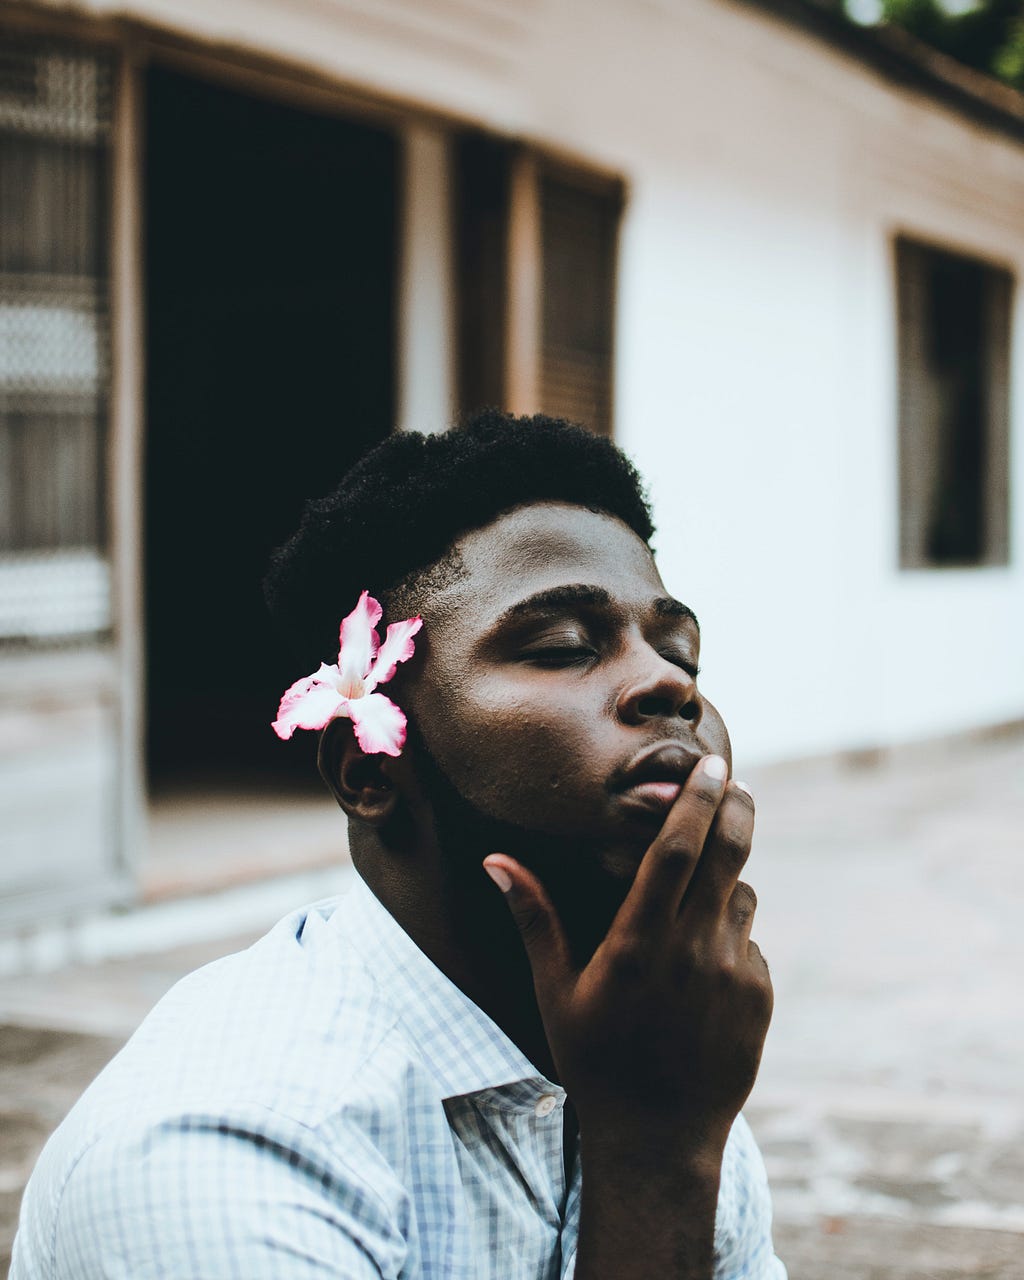 A beautiful Black man with a flower behind his ear.